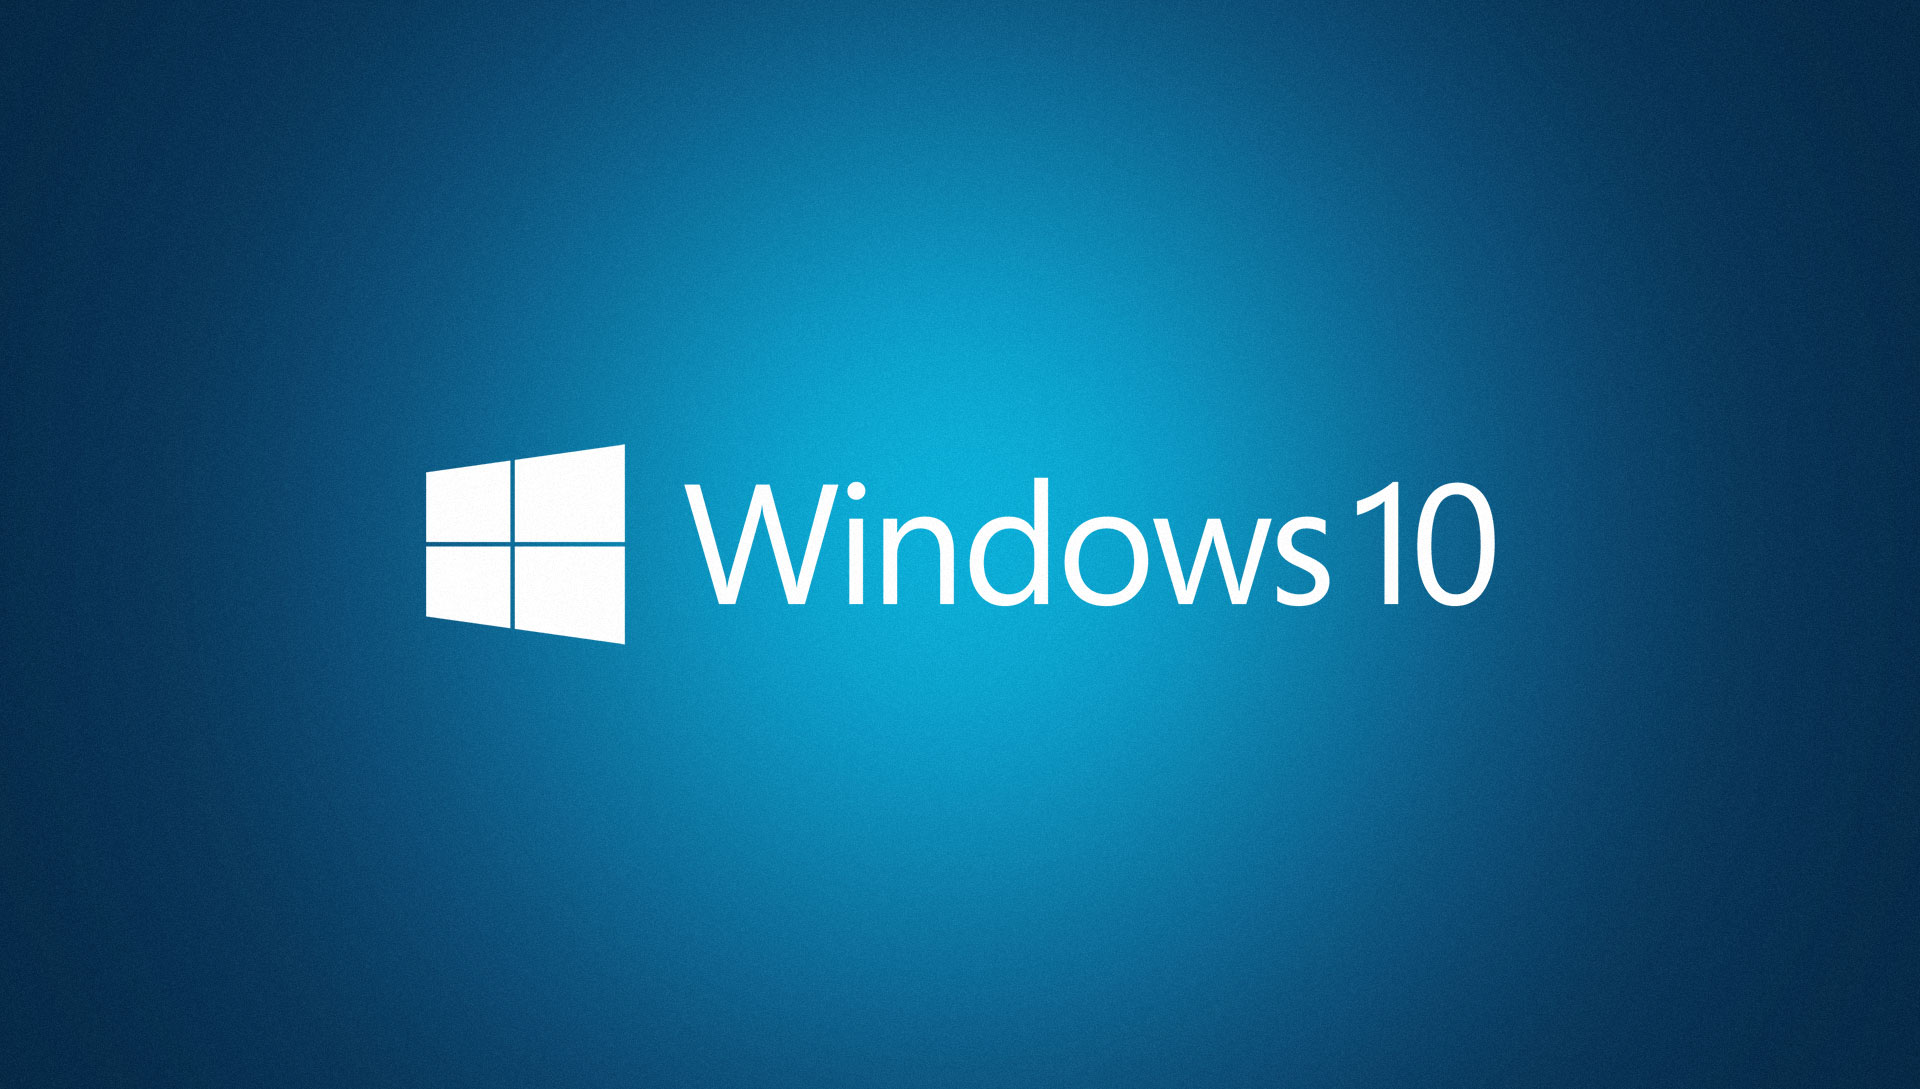  vision of windows 10 in their windows 10 event slated for january 21